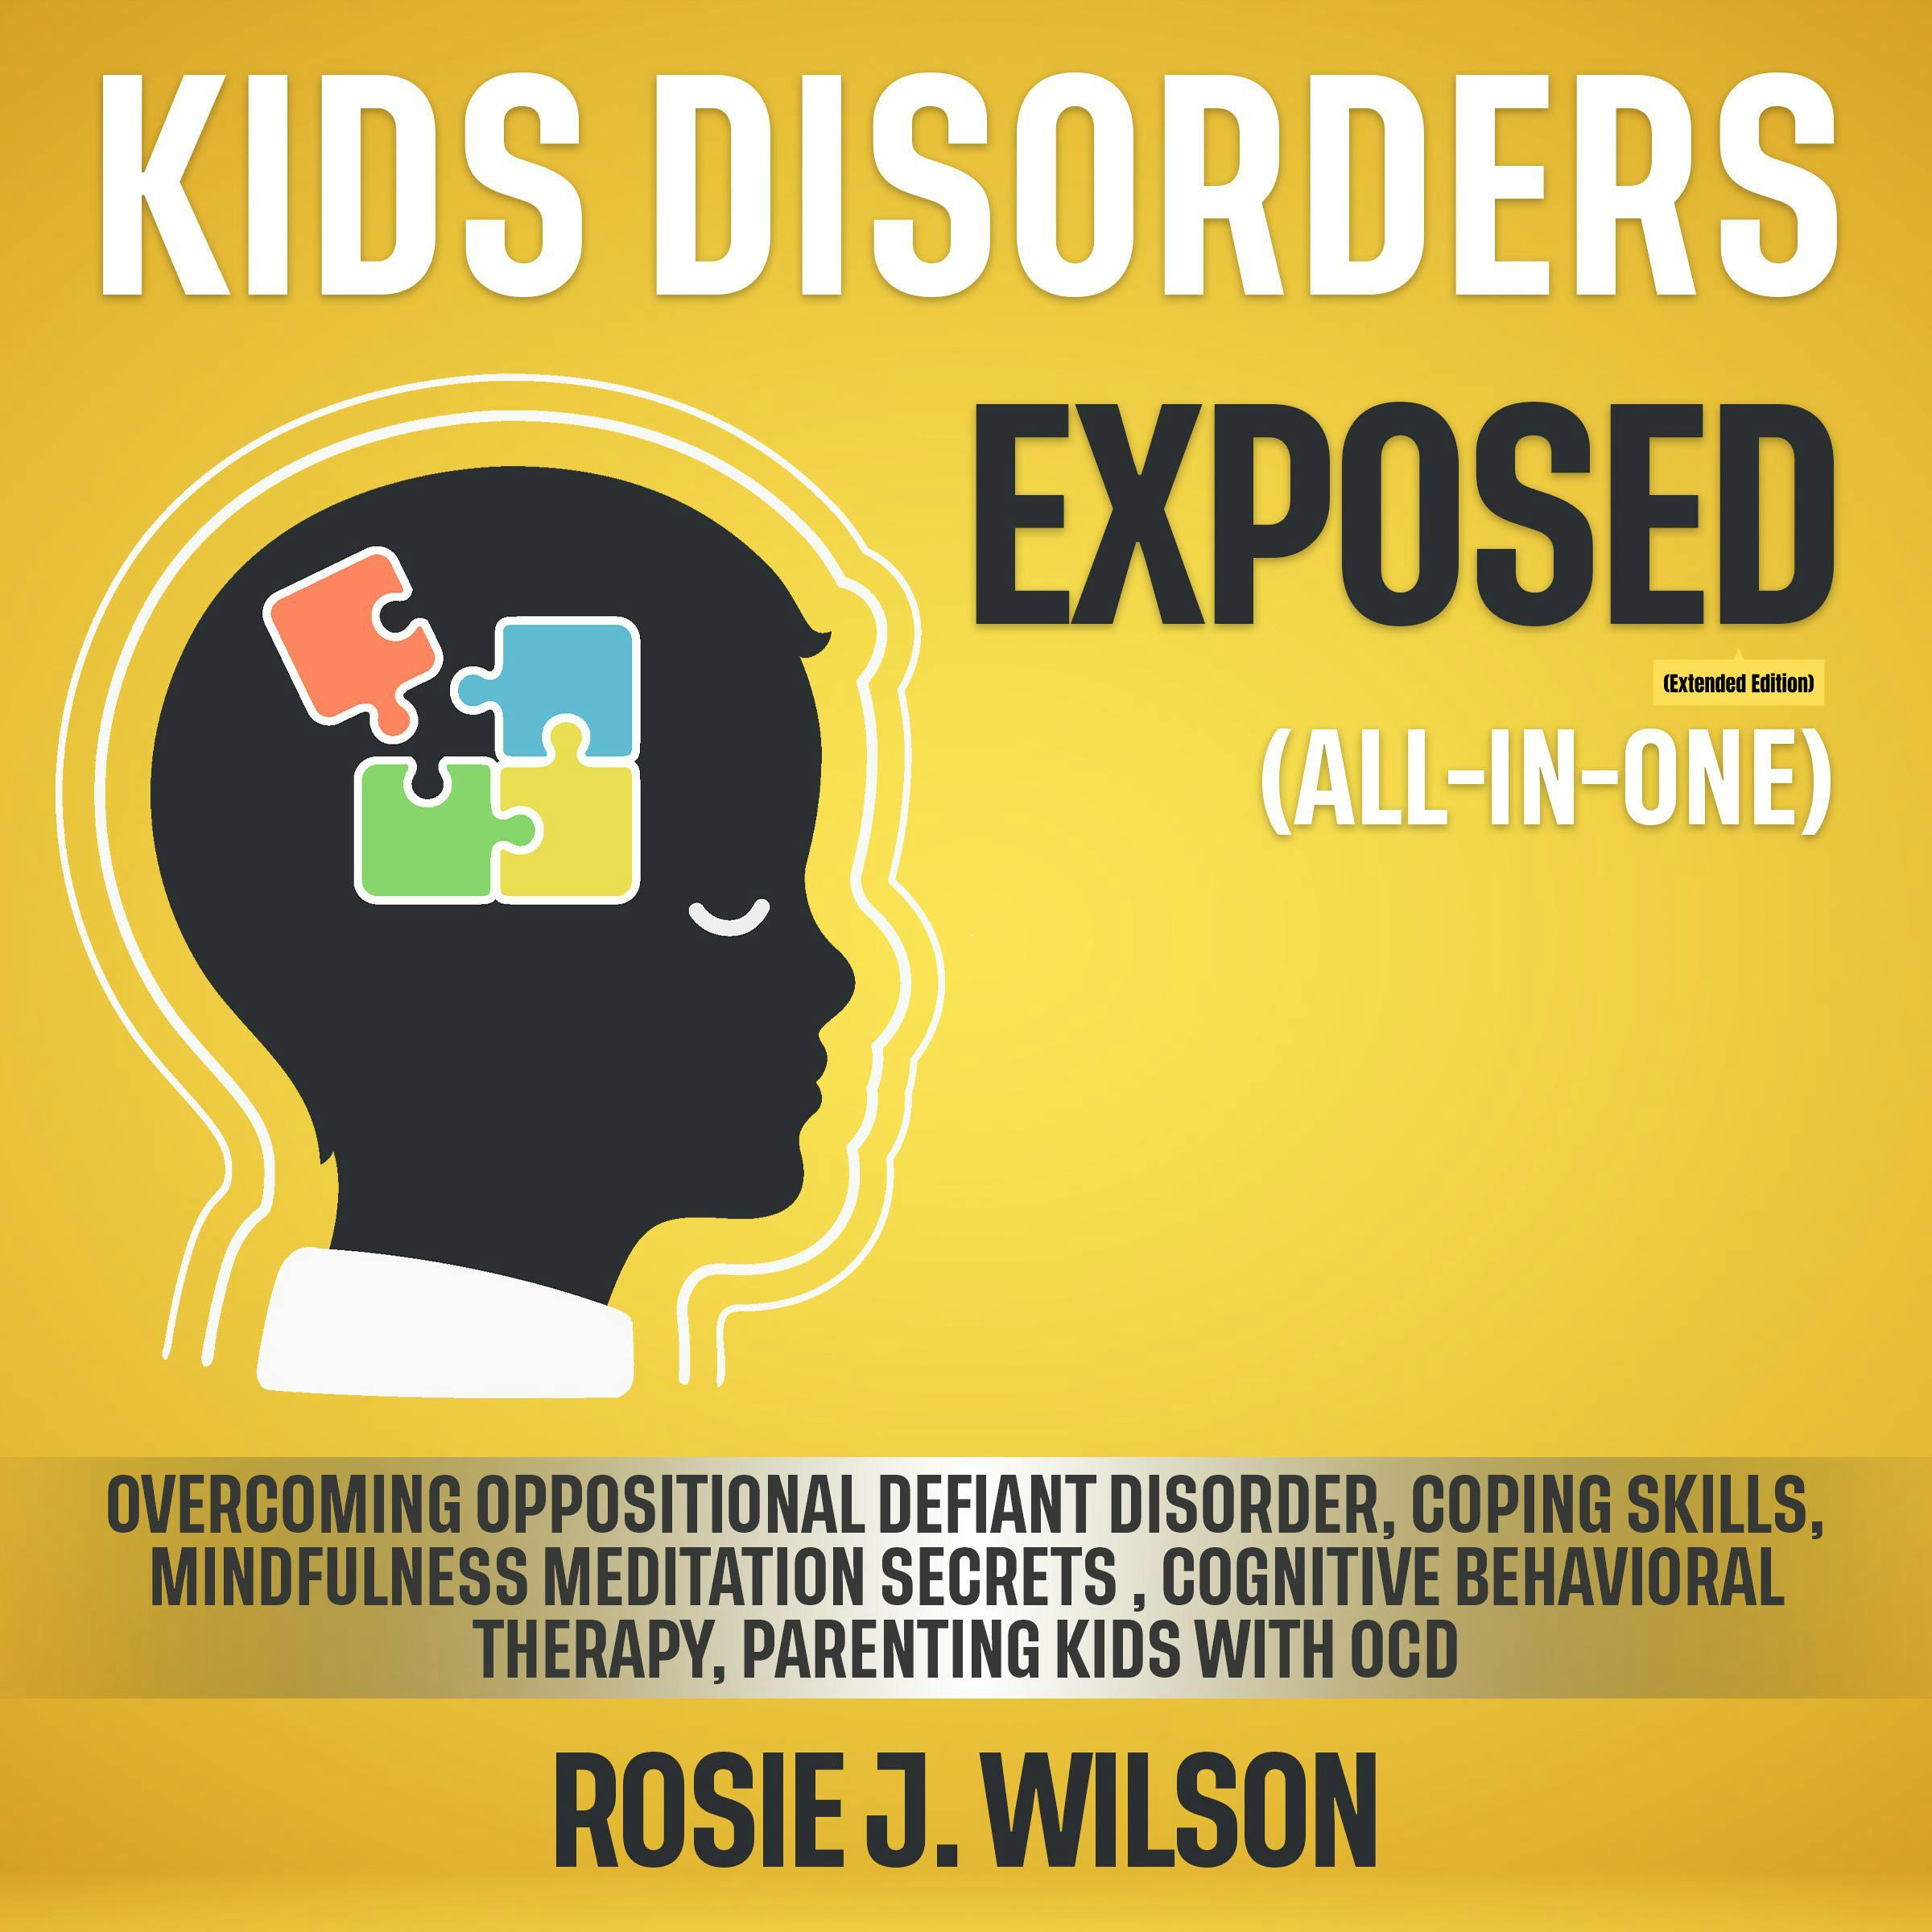 Kids Disorders Exposed (All-in-One) (Extended Edition): Overcoming Oppositional Defiant Disorder, Coping Skills, Mindfulness Meditation Secrets , Cognitive Behavioral Therapy, Parenting Kids with OCD - undefined